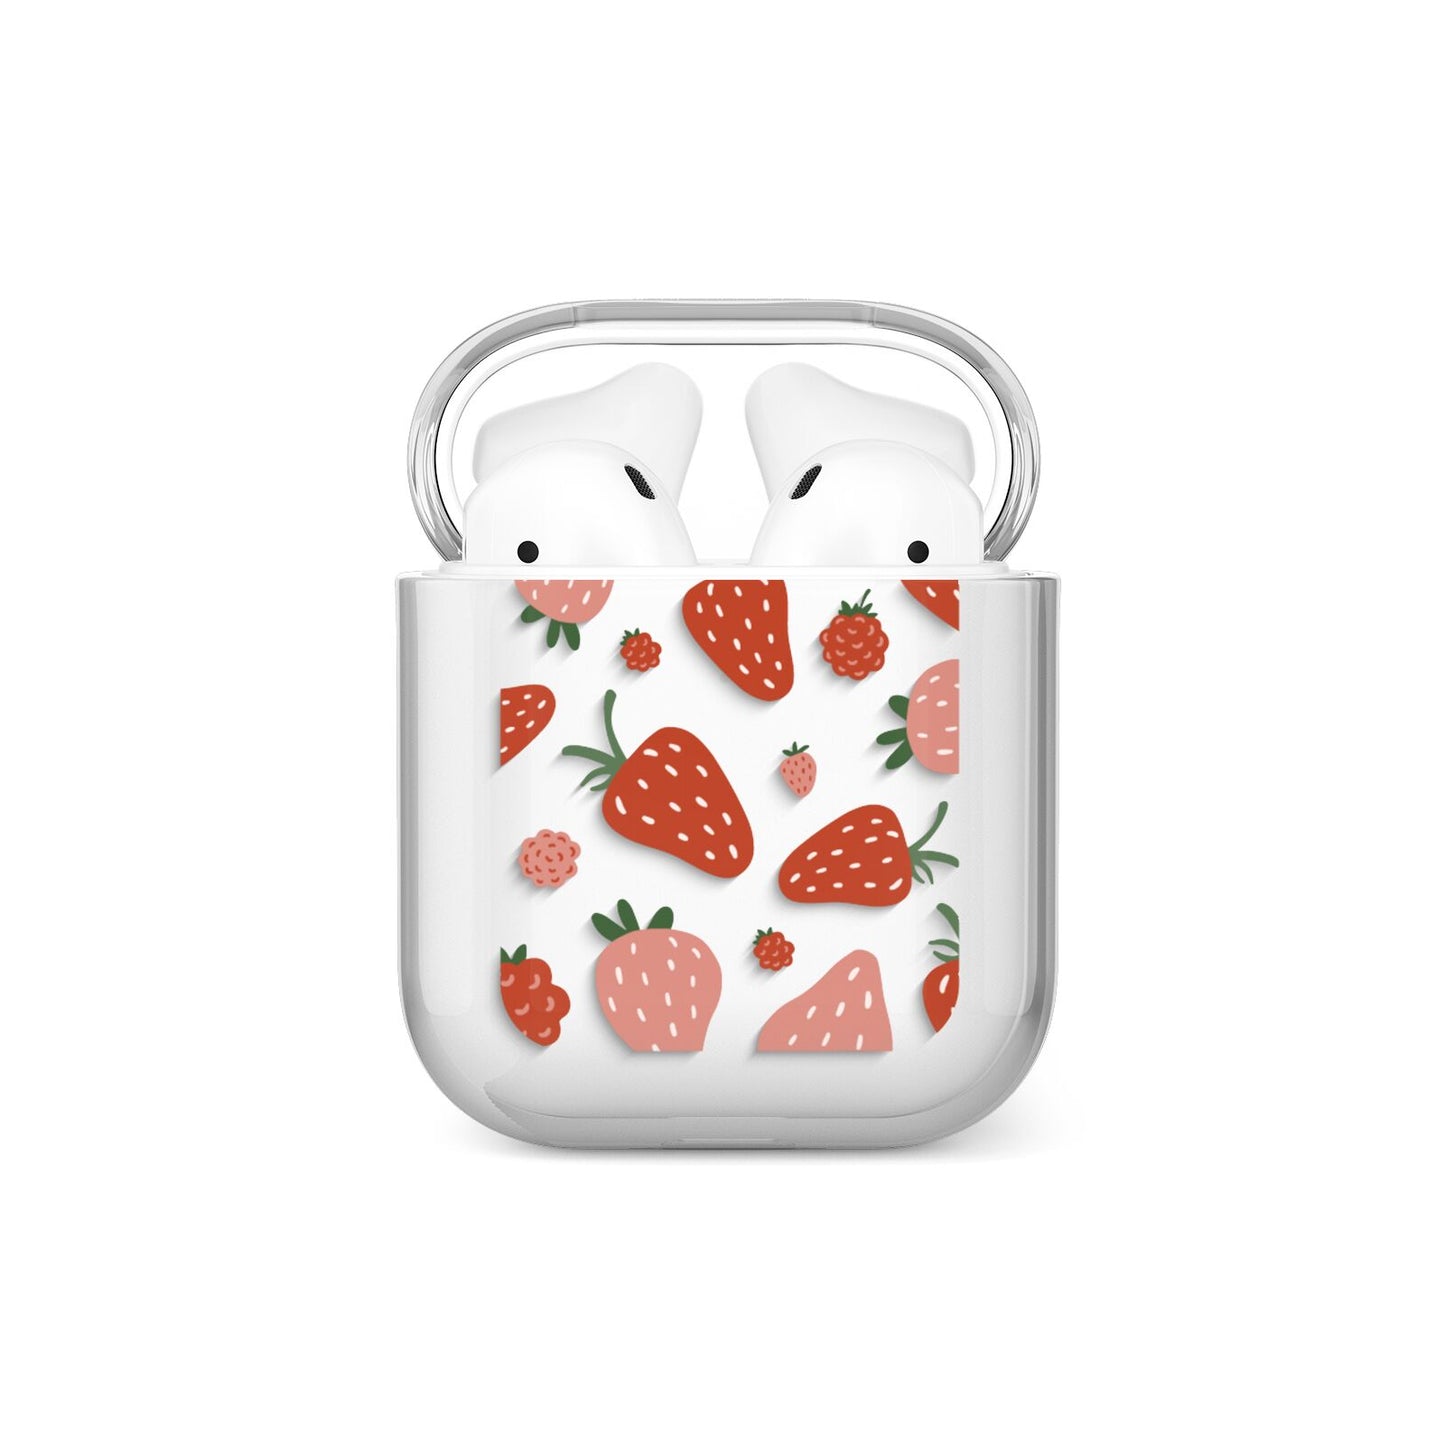 Strawberry AirPods Case